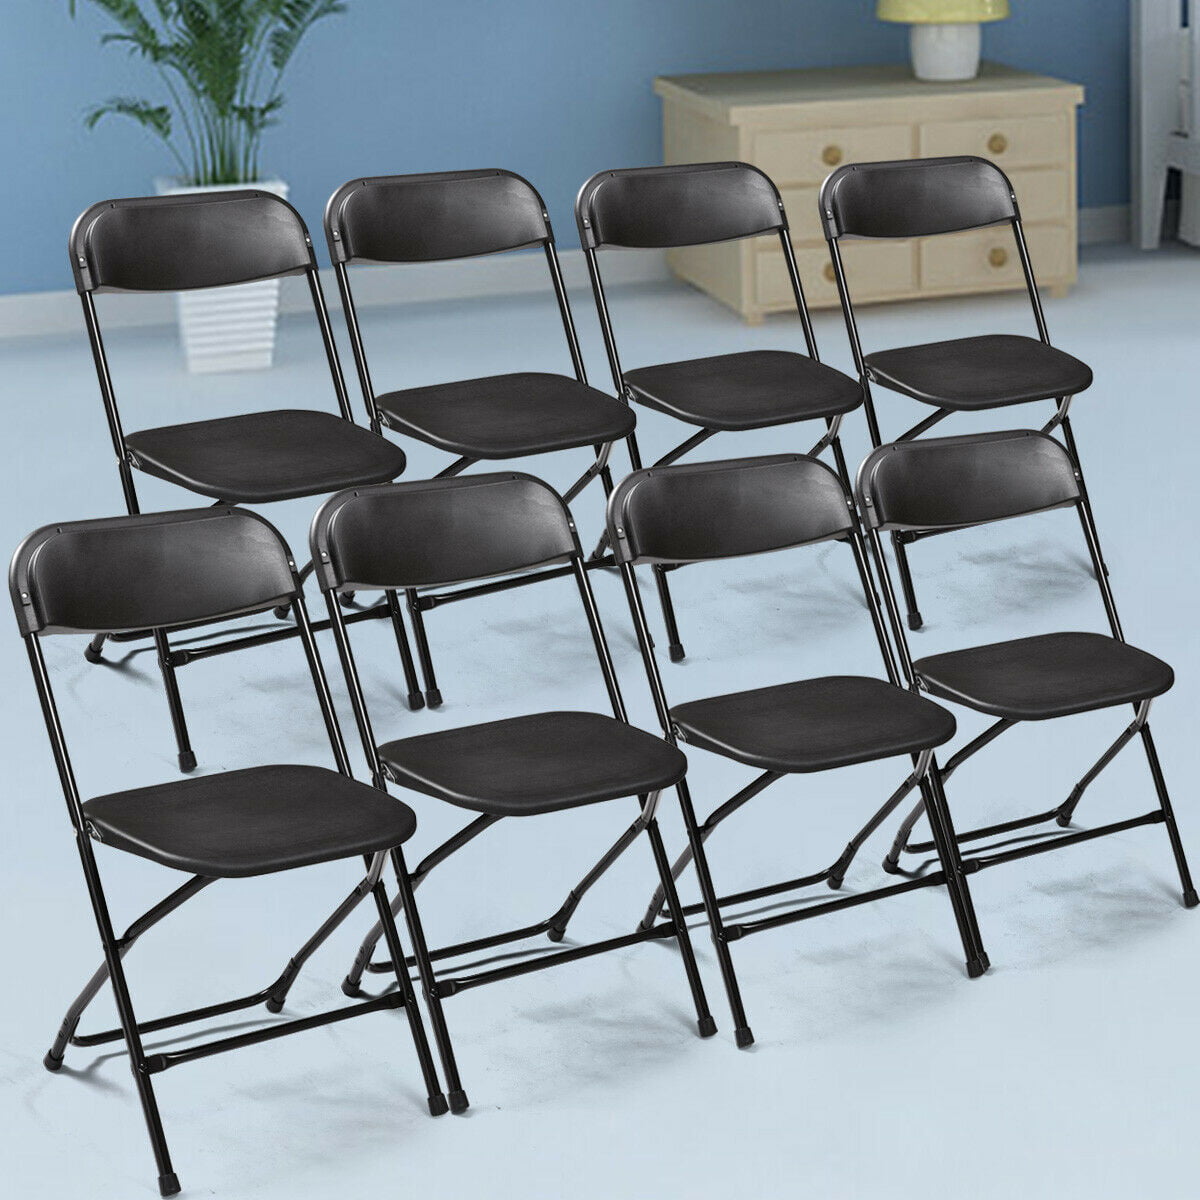 Folding Breakfast Bar Stool Foldable Padded Chair Seat Office Garden Party Event 